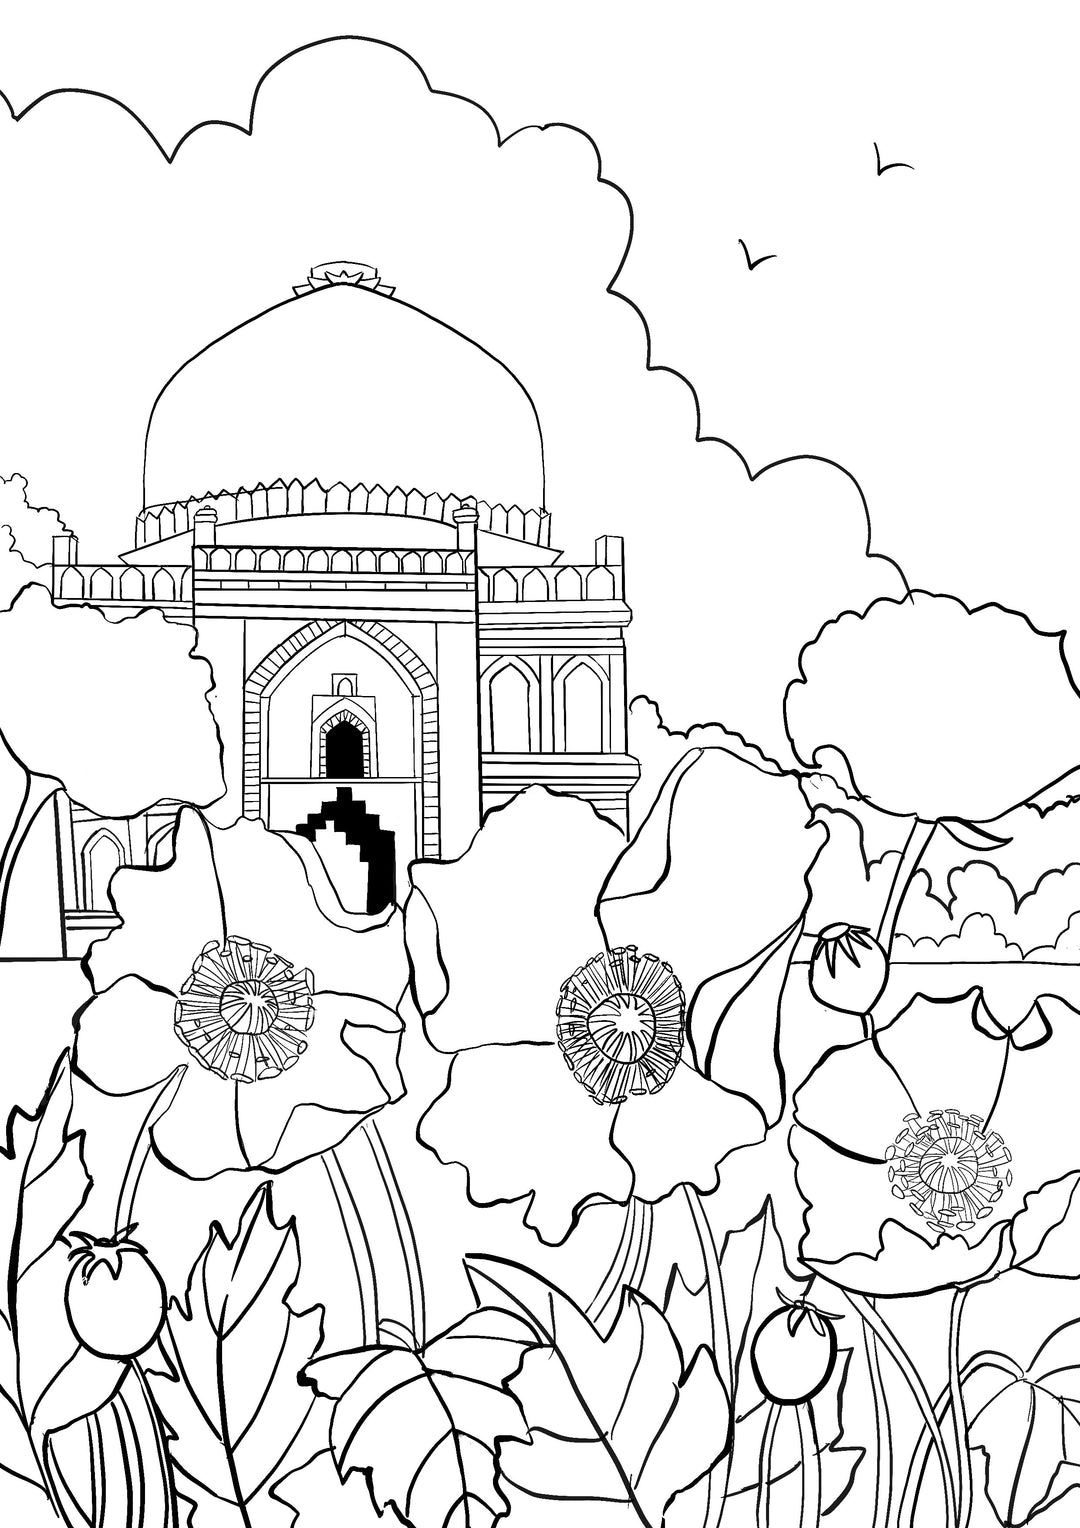 Colouring Pages: Lodhi gardens - Rihaa